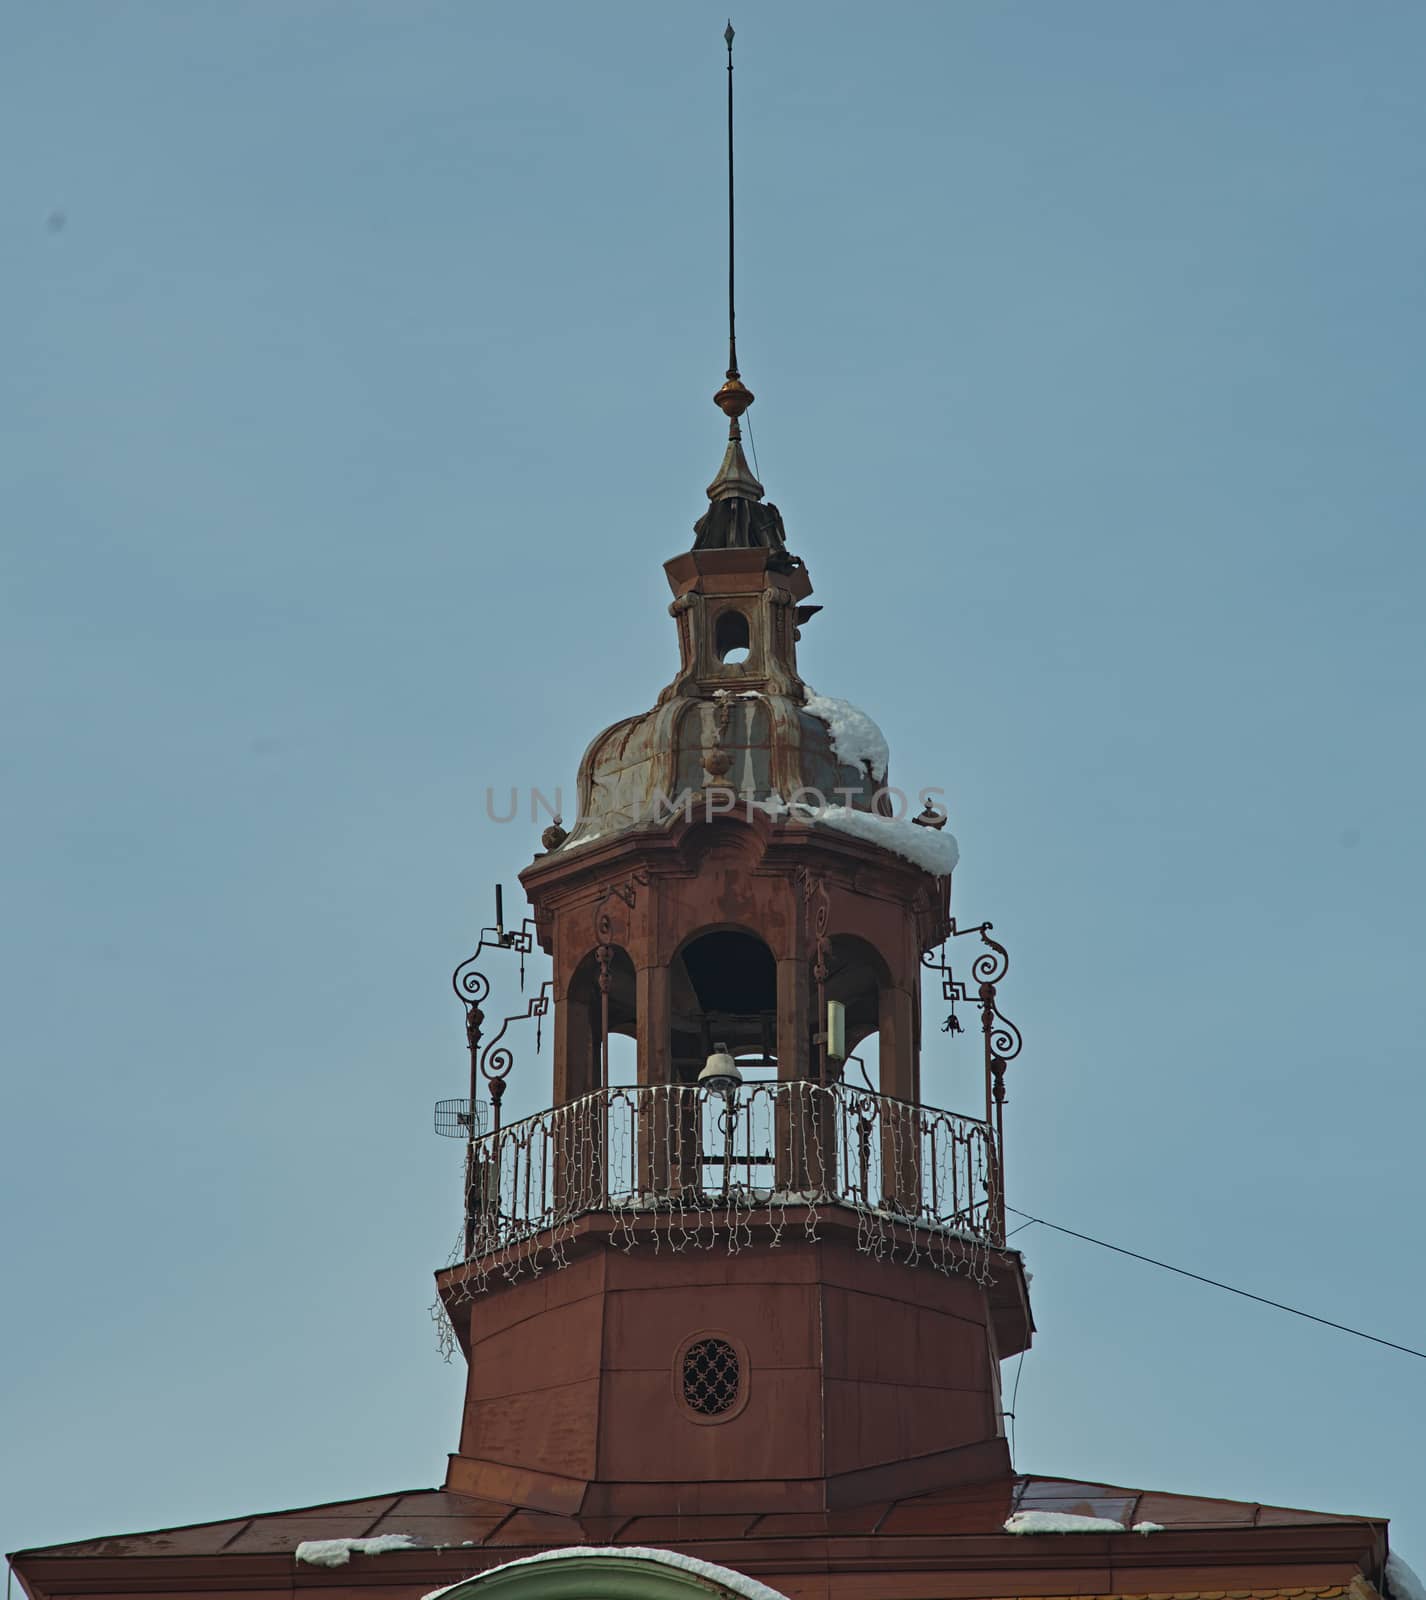 Tower with open balcony on top of baroque building by sheriffkule